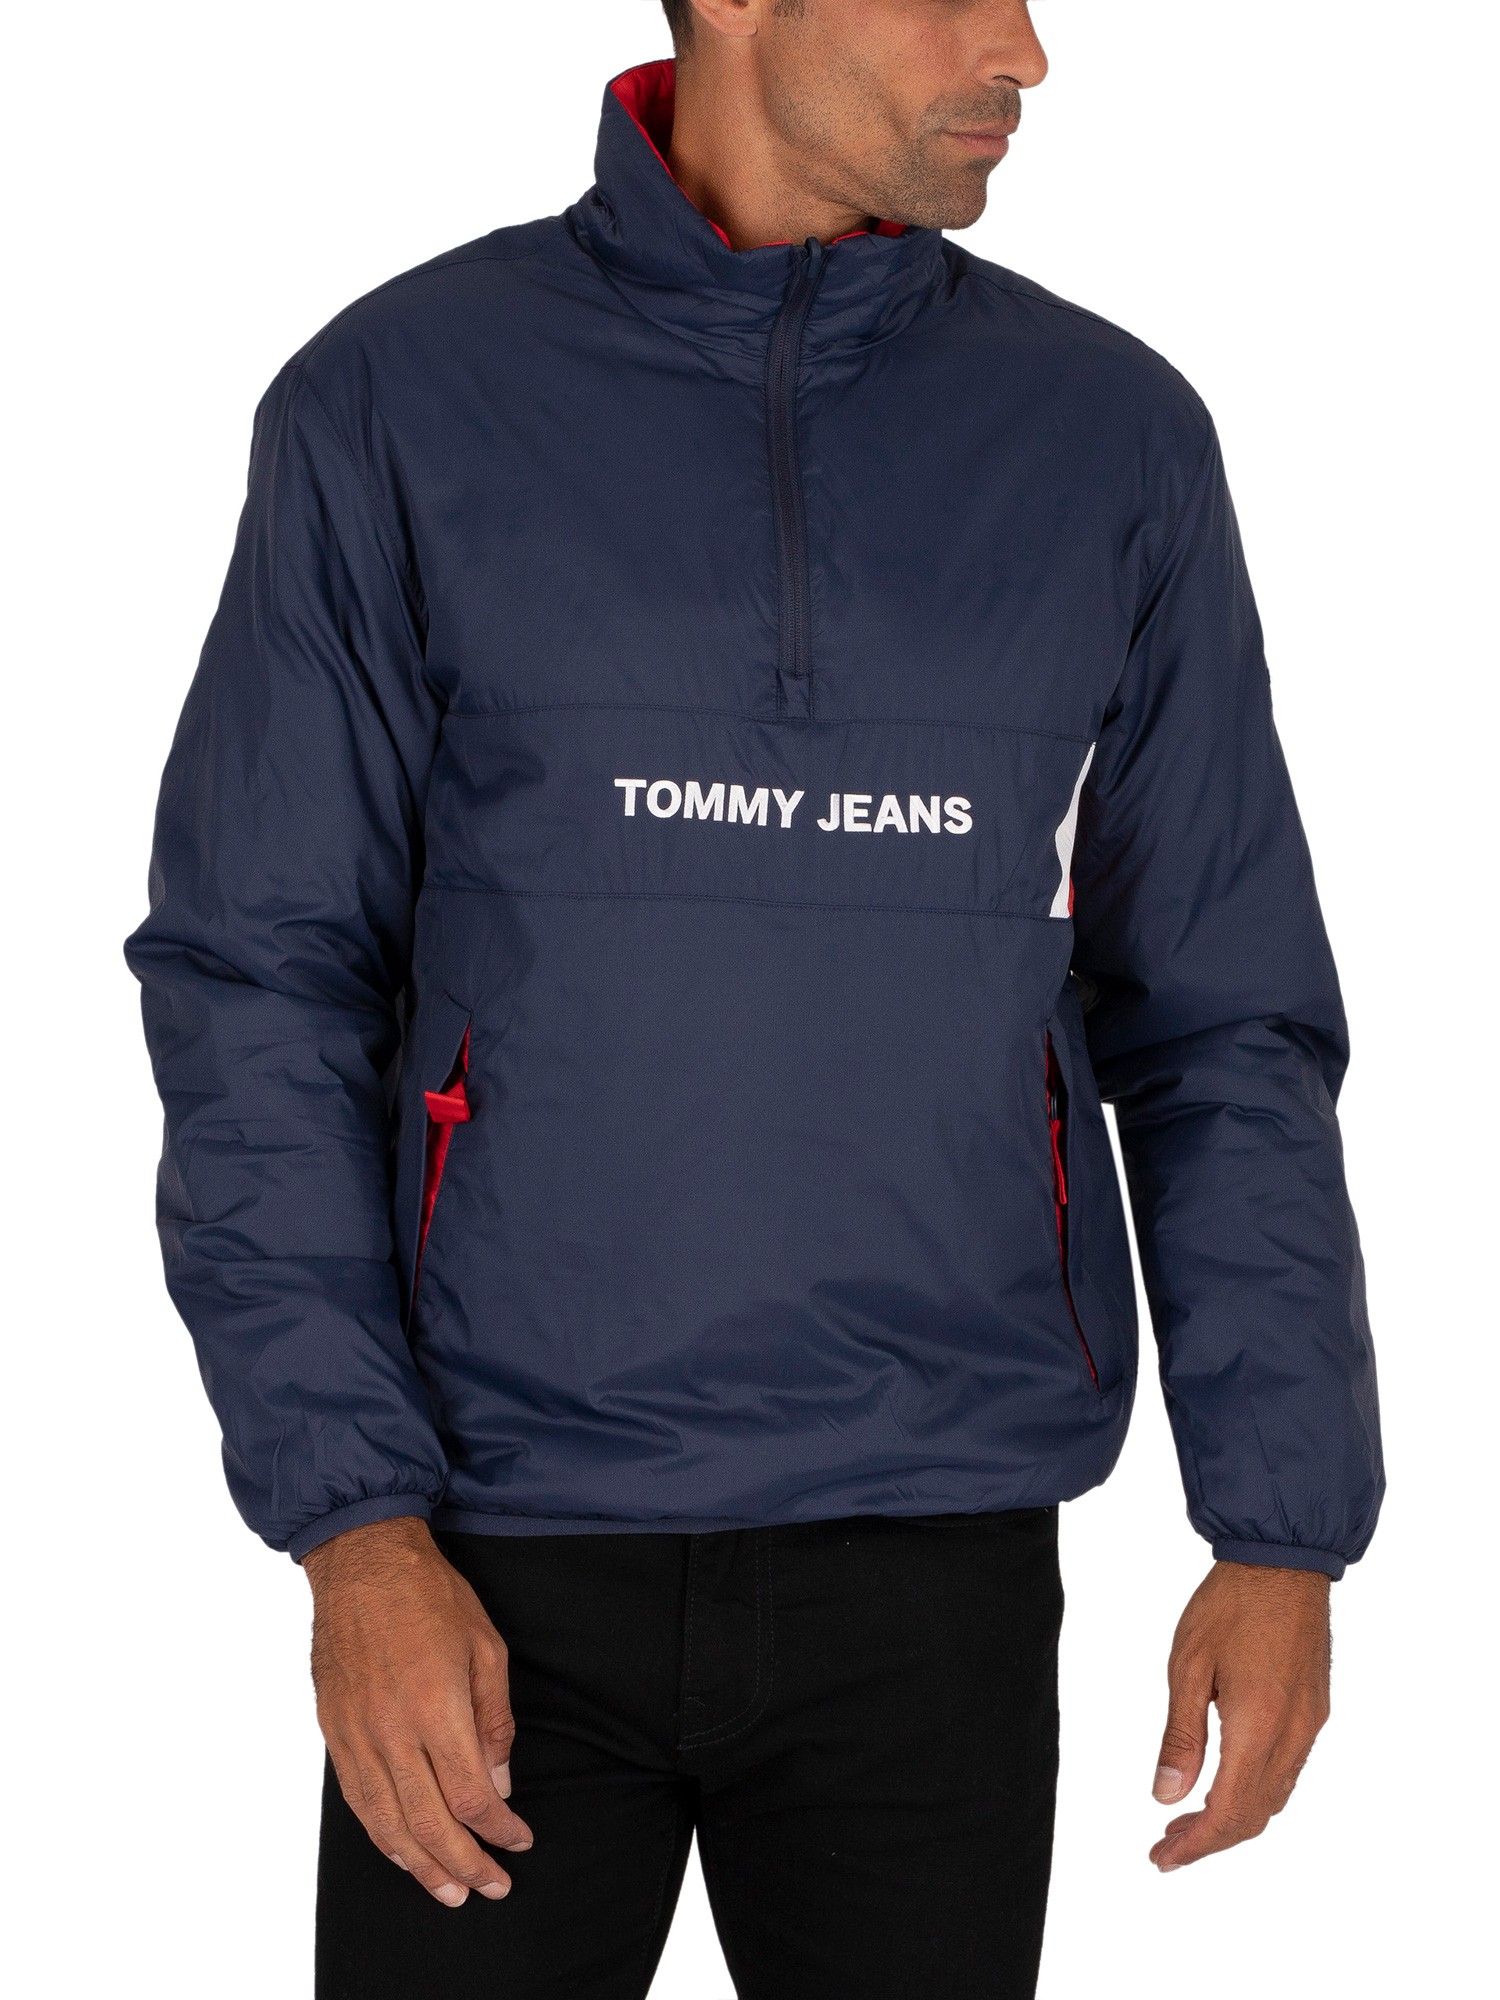 reversible tommy jeans jacket